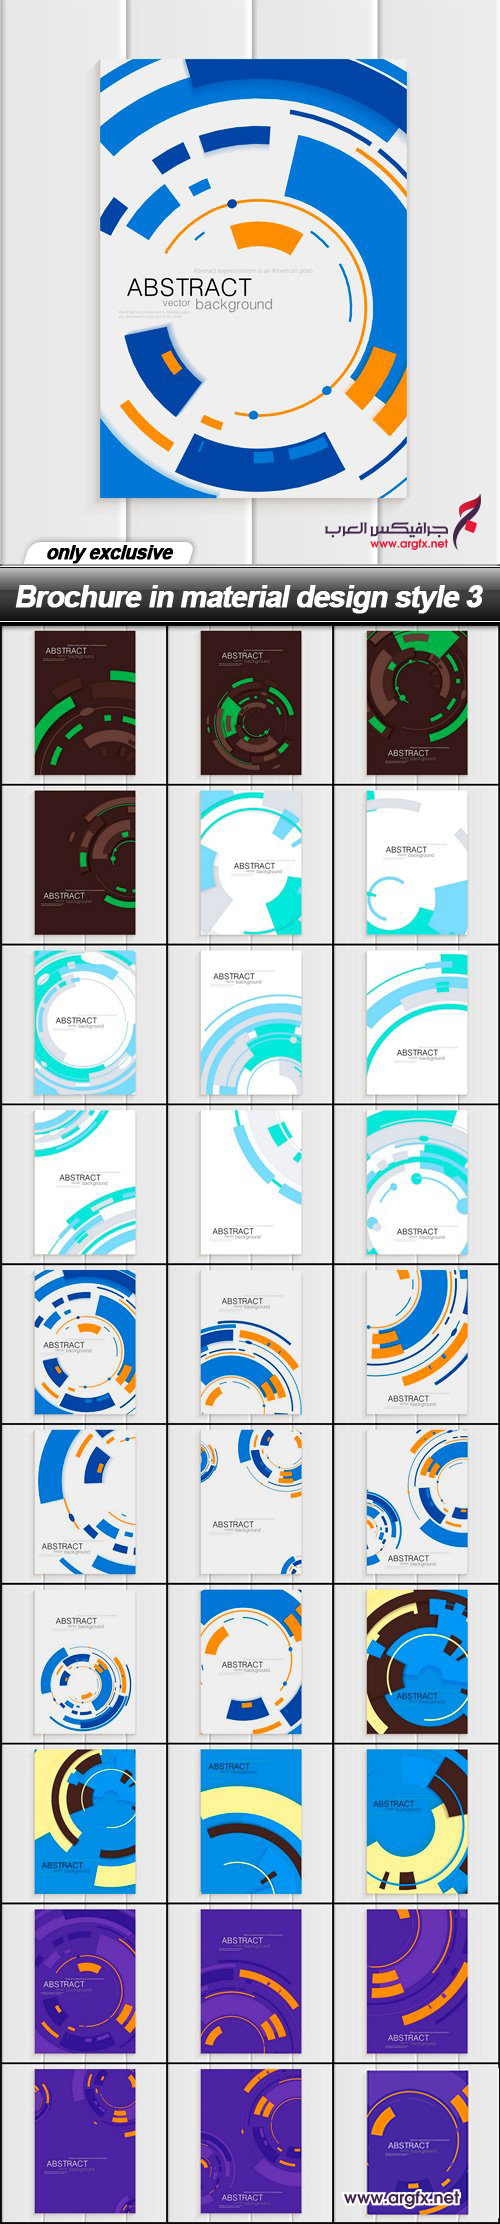 Brochure in material design style 3 - 30 EPS